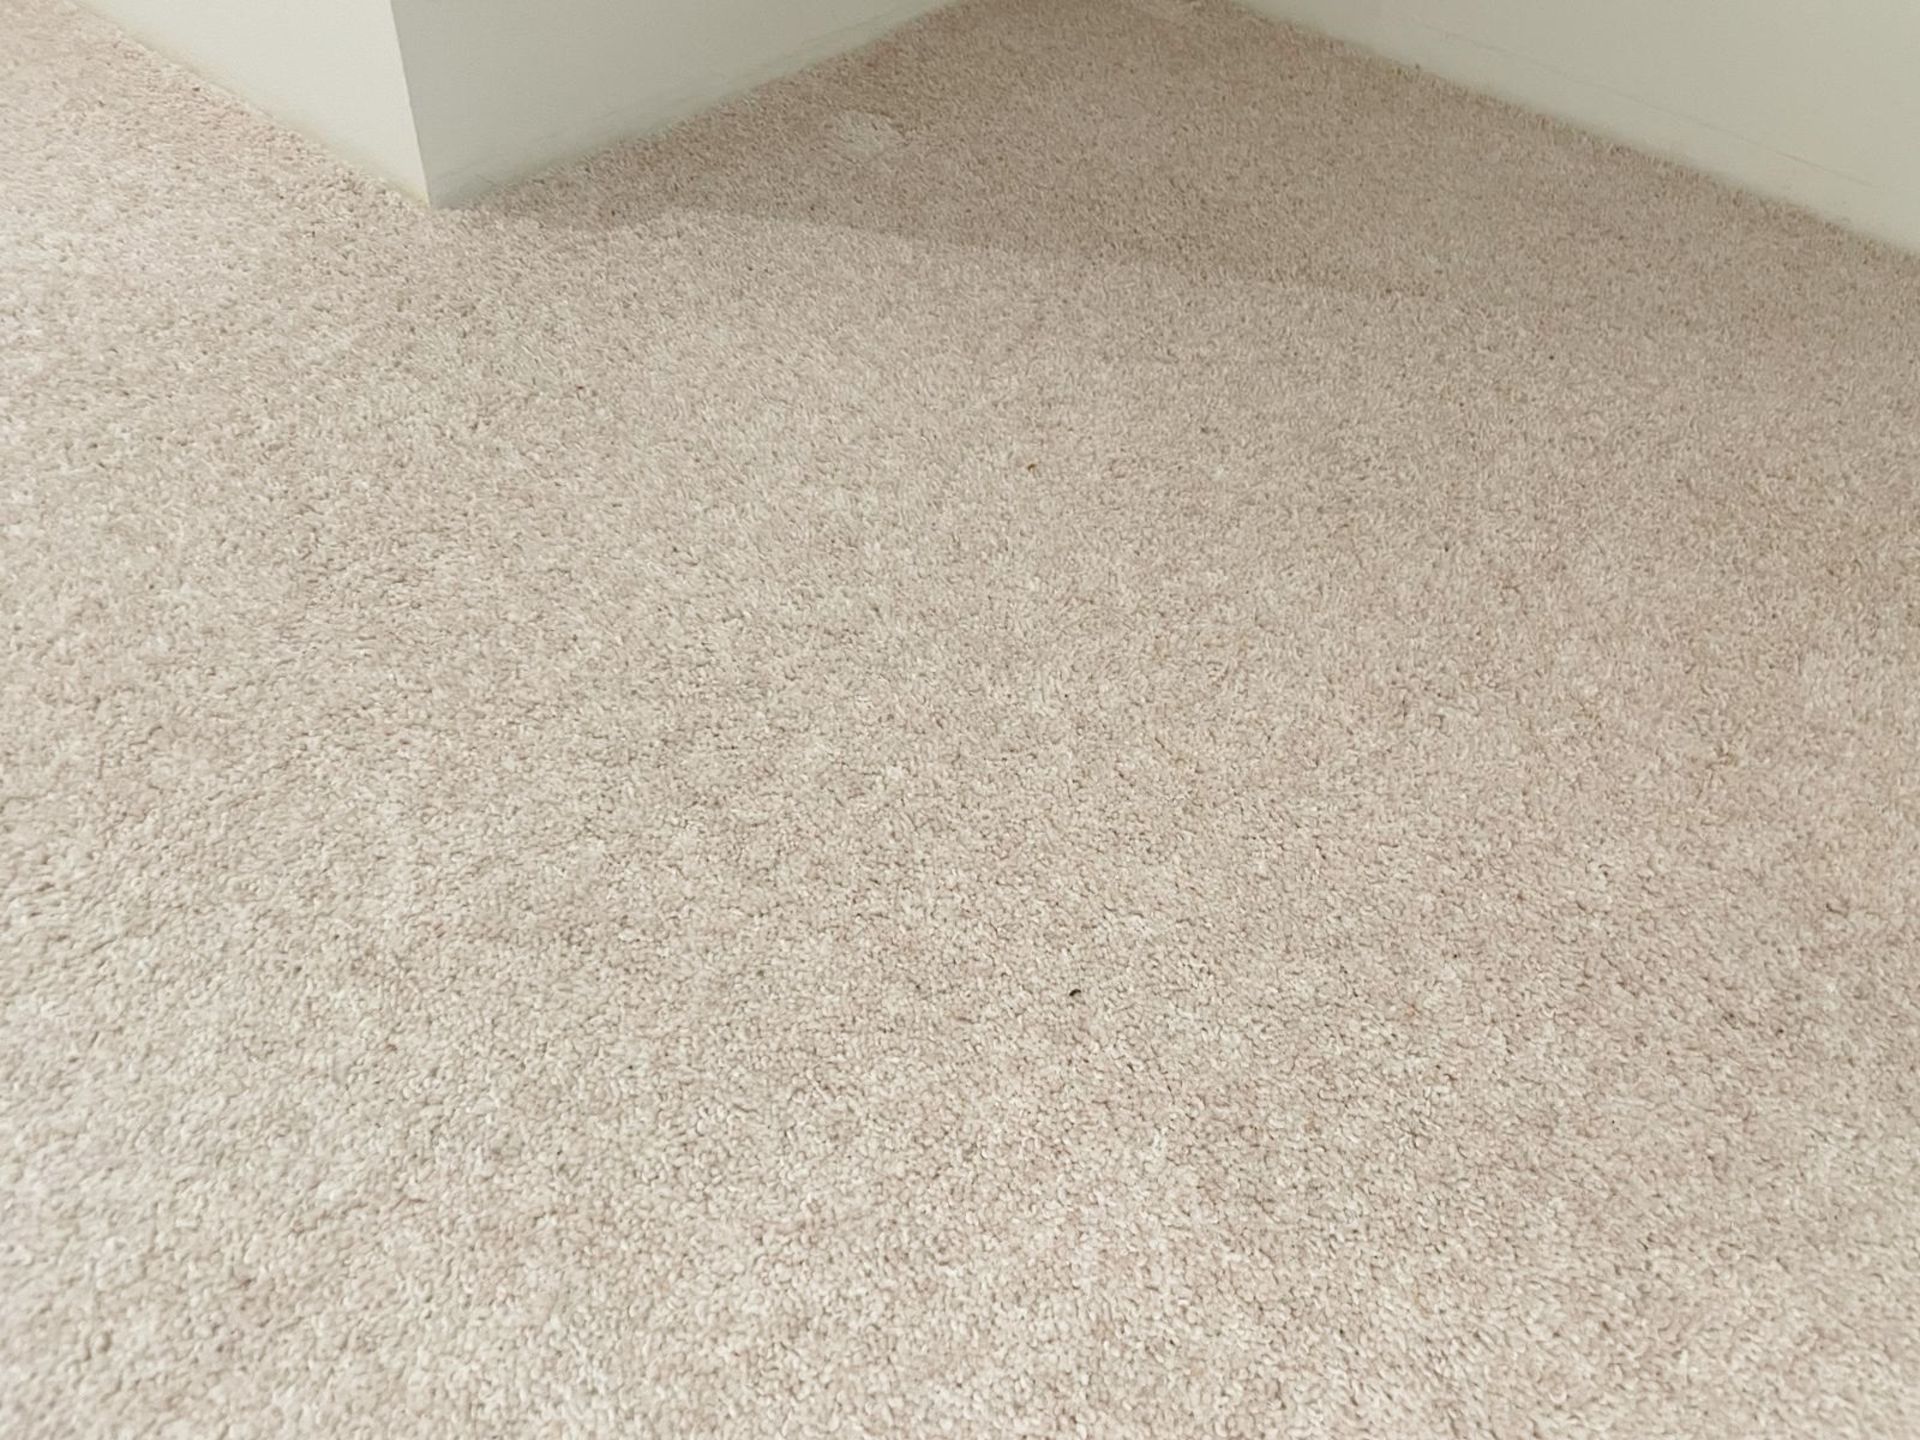 1 x Premium Wool Downstairs Carpet in a Neutral Tone + Underlay - NO VAT ON THE HAMMER - Image 2 of 7